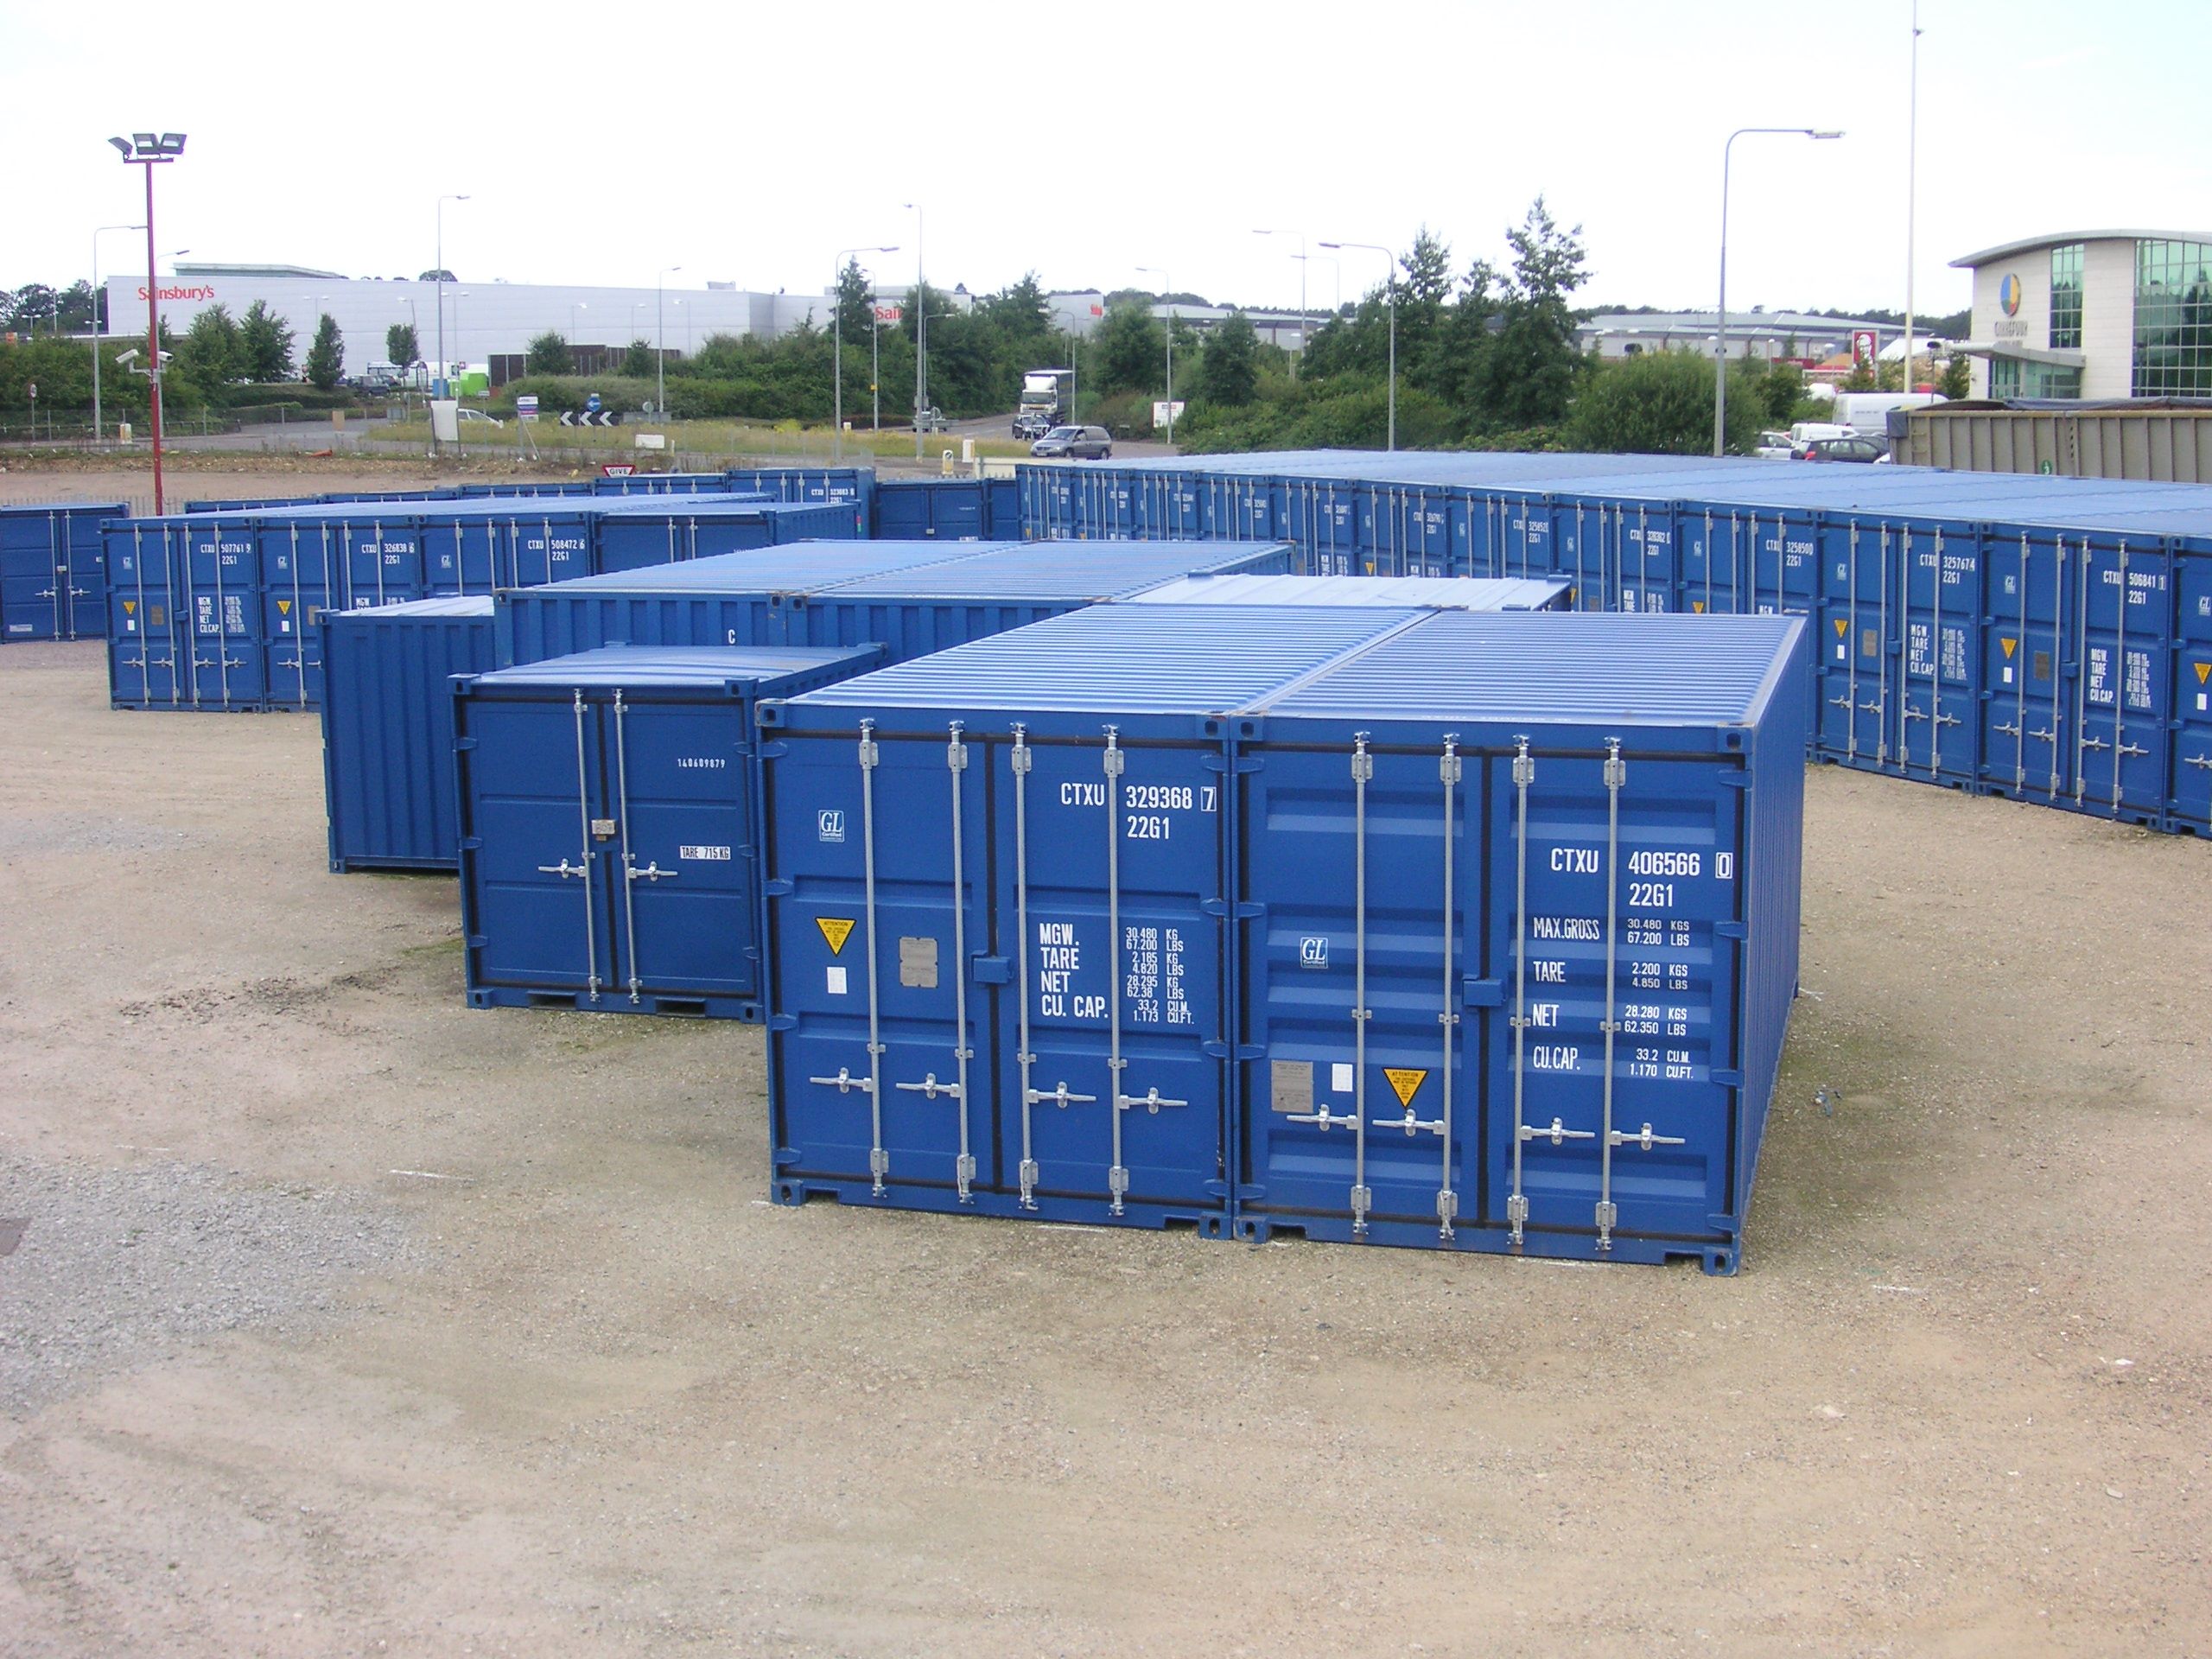 Shippingcontainere